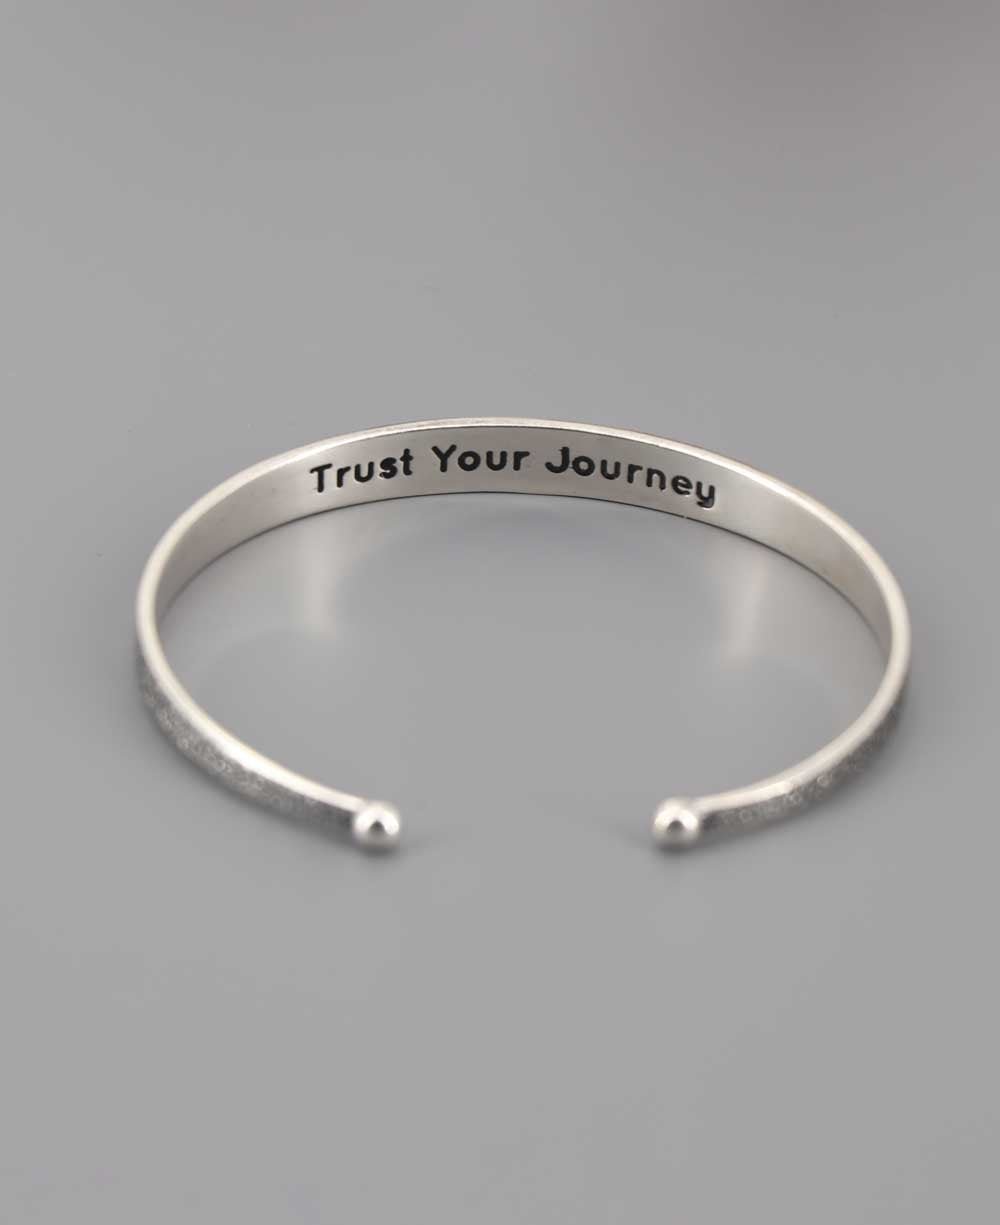 Inspirational Bracelets for Women, Daughter, Cousin, Friend, Granddaughter Sterling  Silver custom Saying encouragement Gift Cuff Bangle - Etsy